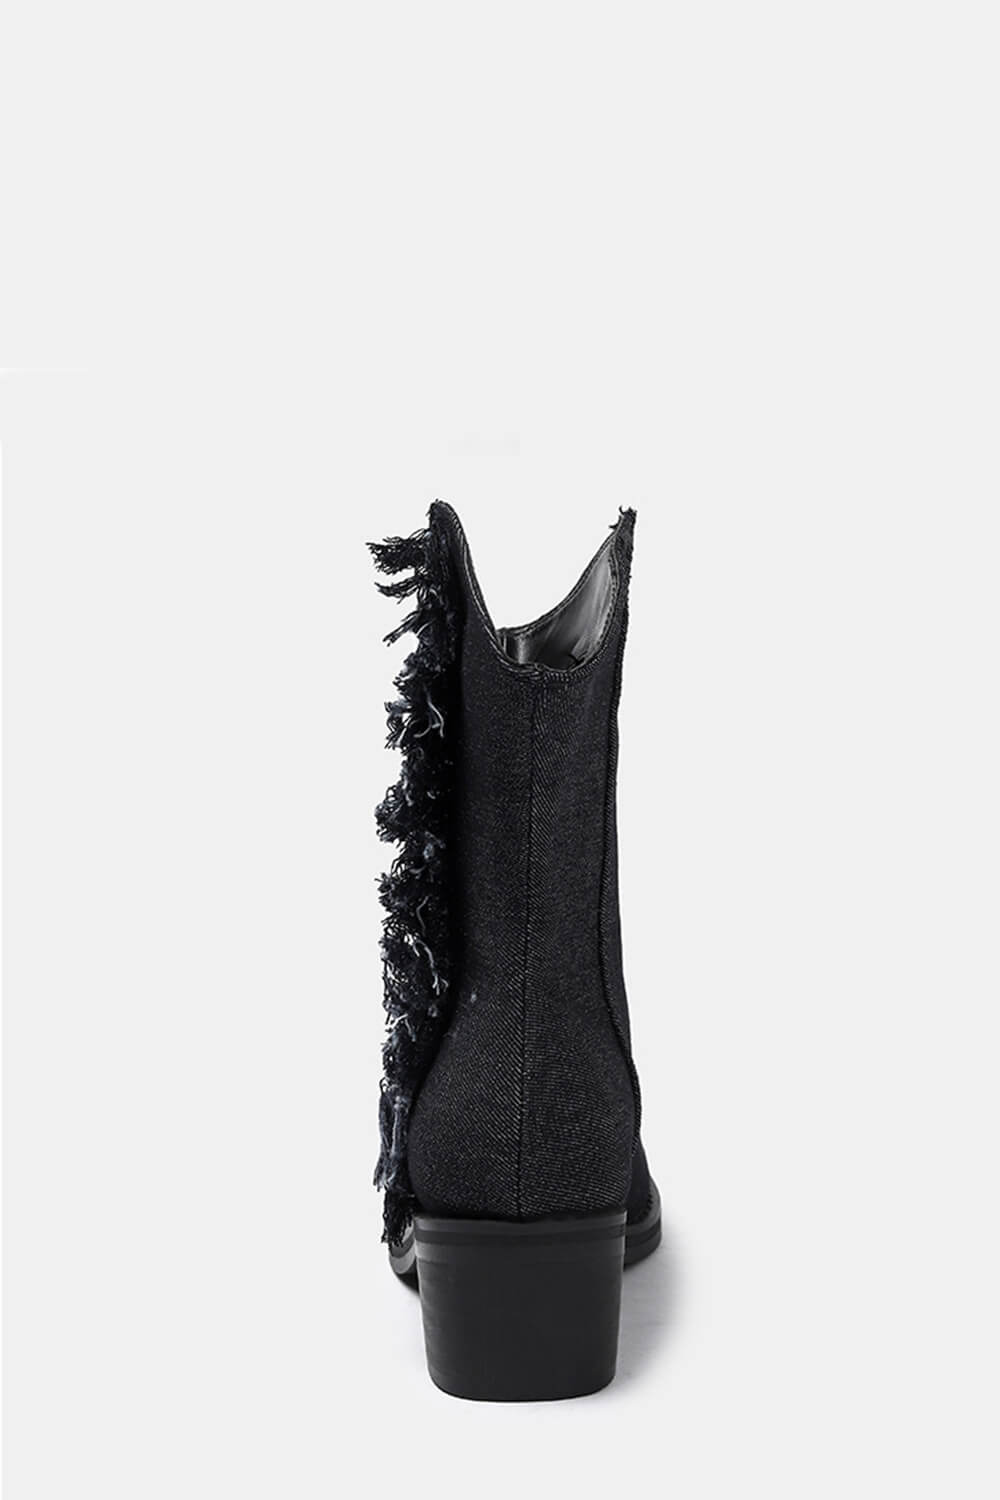 Denim Chain-Link Fringe Ankle Western Cowboy Boots With Square Toe And Hardware Detail - Black